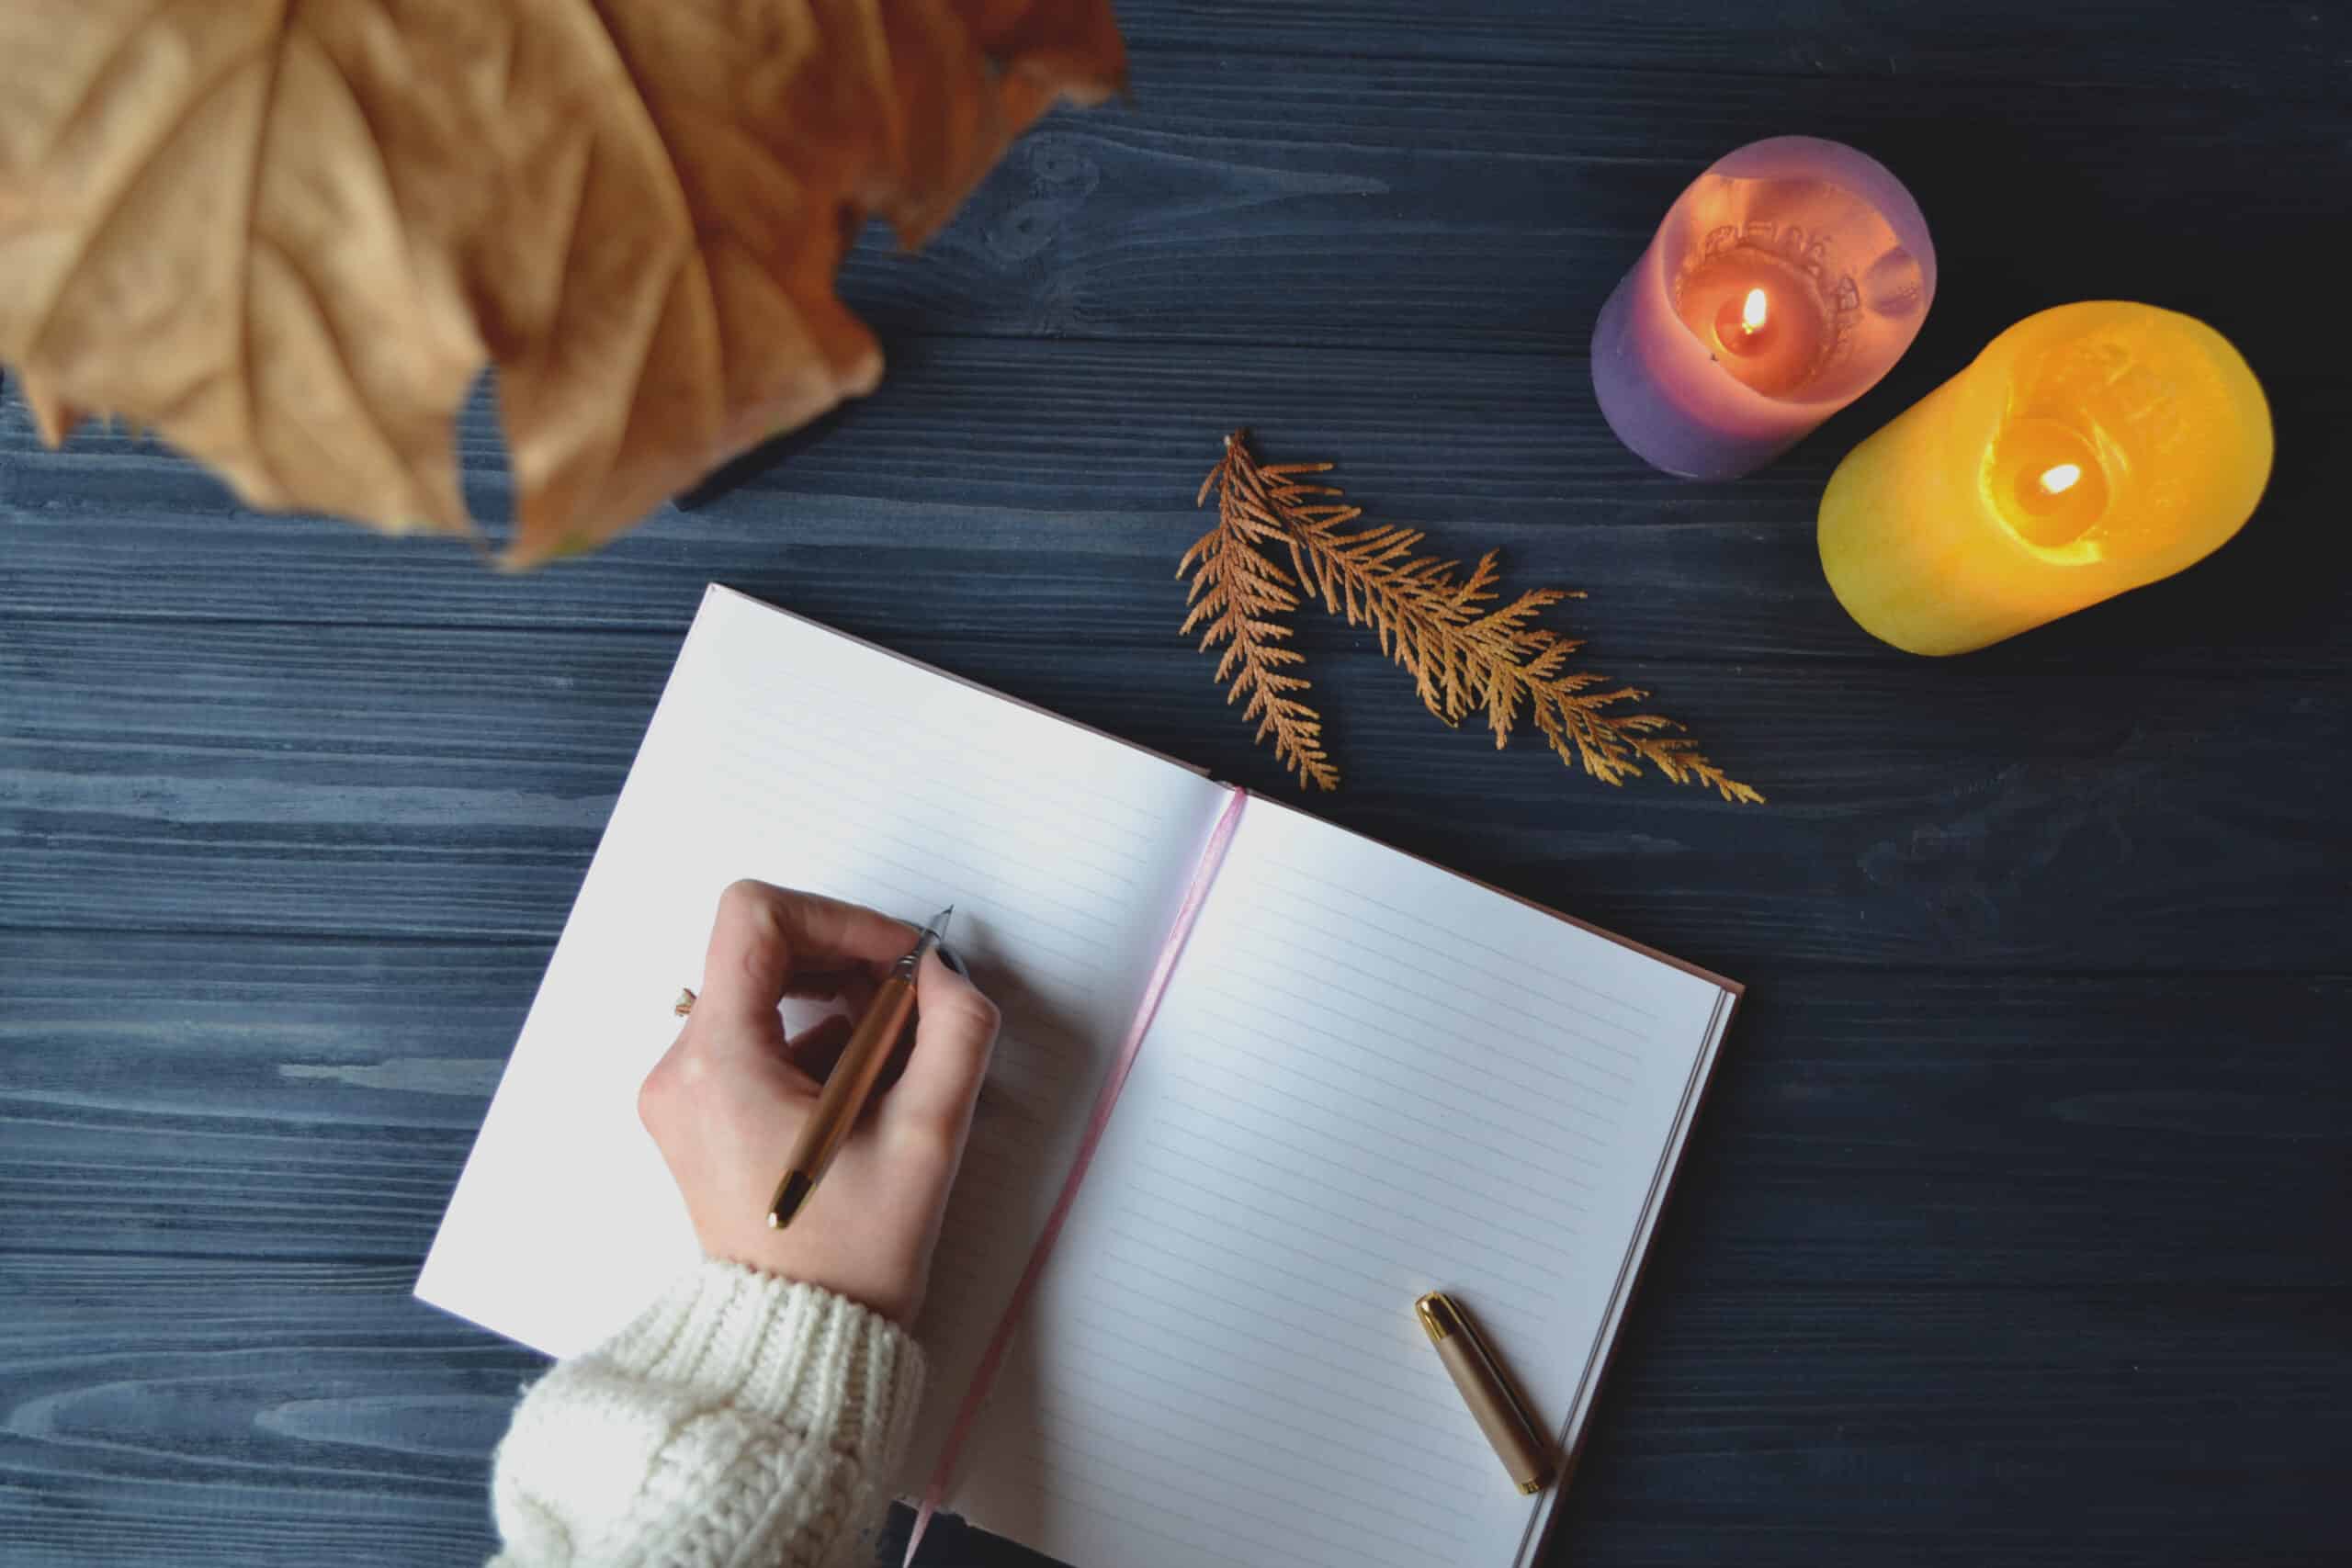 Woman's hand writing in the notebook on aesthetic wooden desk with lit candles.